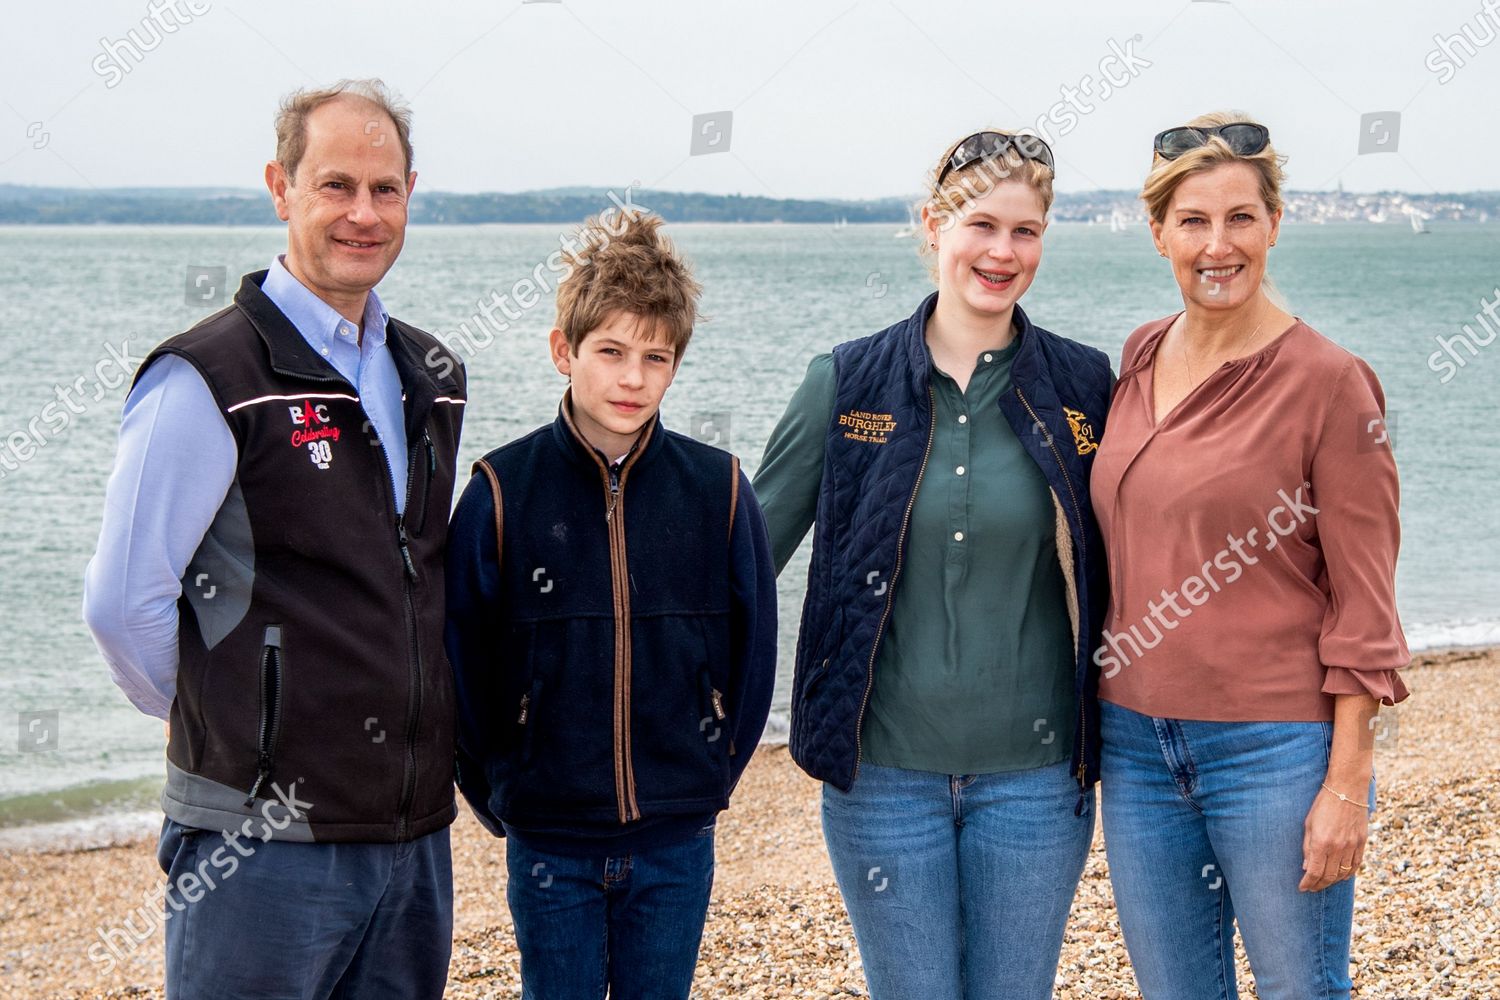 prince-edward-and-sophie-countess-of-wessex-great-british-beach-clean-southsea-beach-portsmouth-uk-shutterstock-editorial-10782998ch.jpg